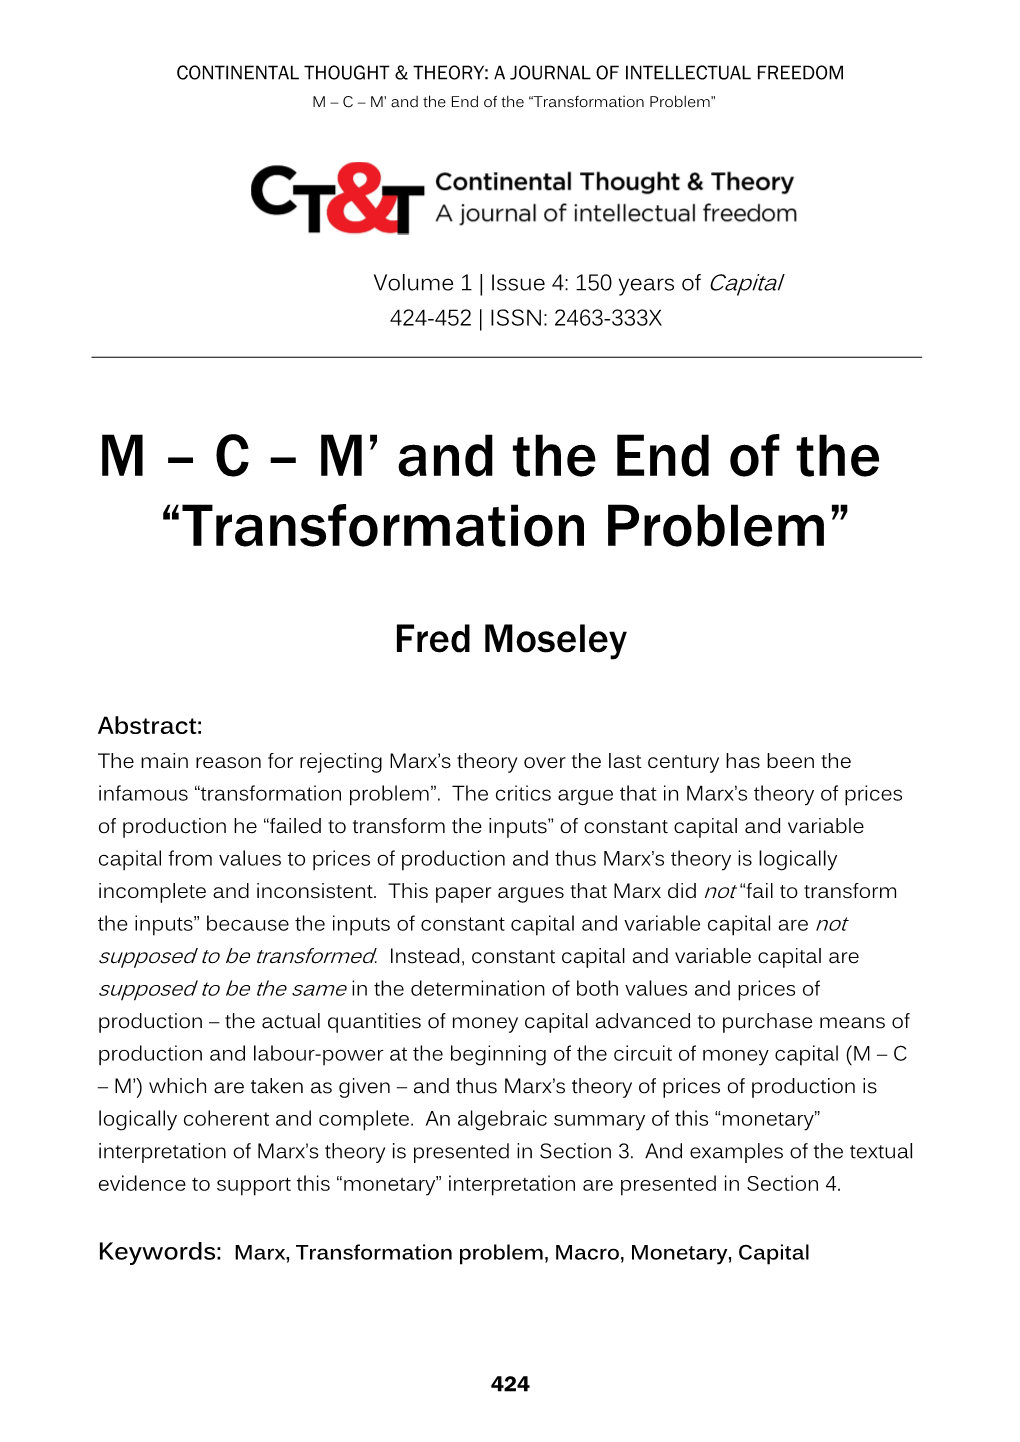 M – C – M' and the End of the “Transformation Problem”